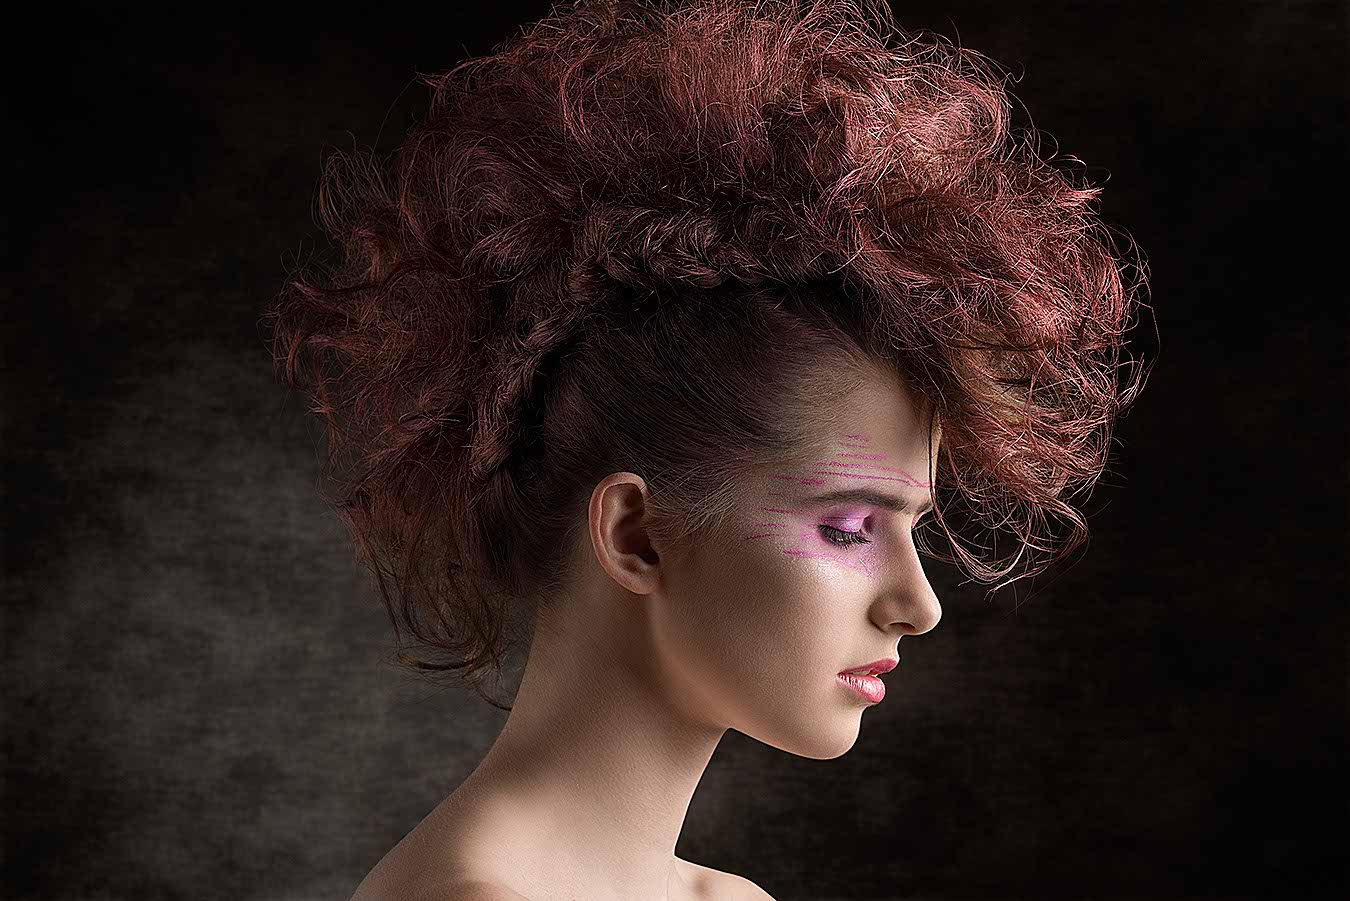 close-up beauty portrait of punk female with red rock hairdo and creative make-up. Perfect skin, aggressive fashion trendy style